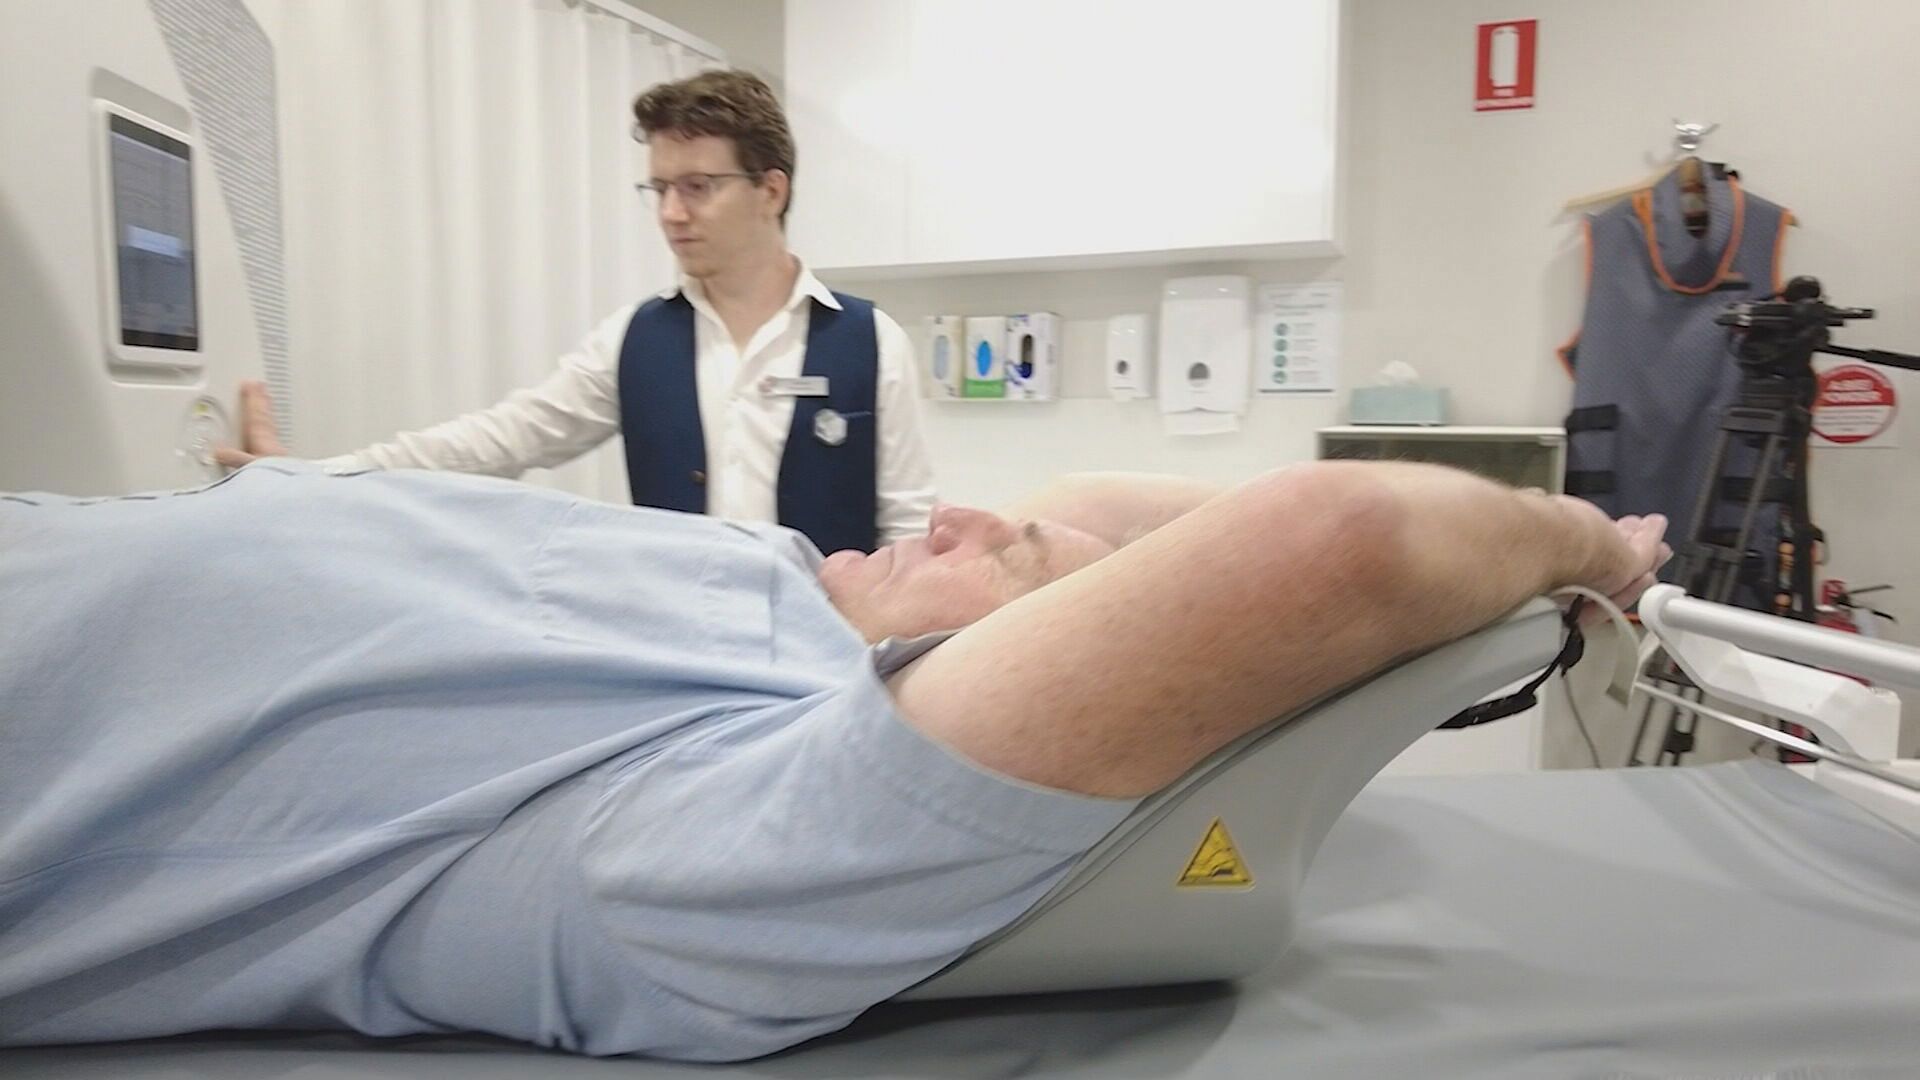 perth's revolutionary ct scanner offers safer, high-definition scans